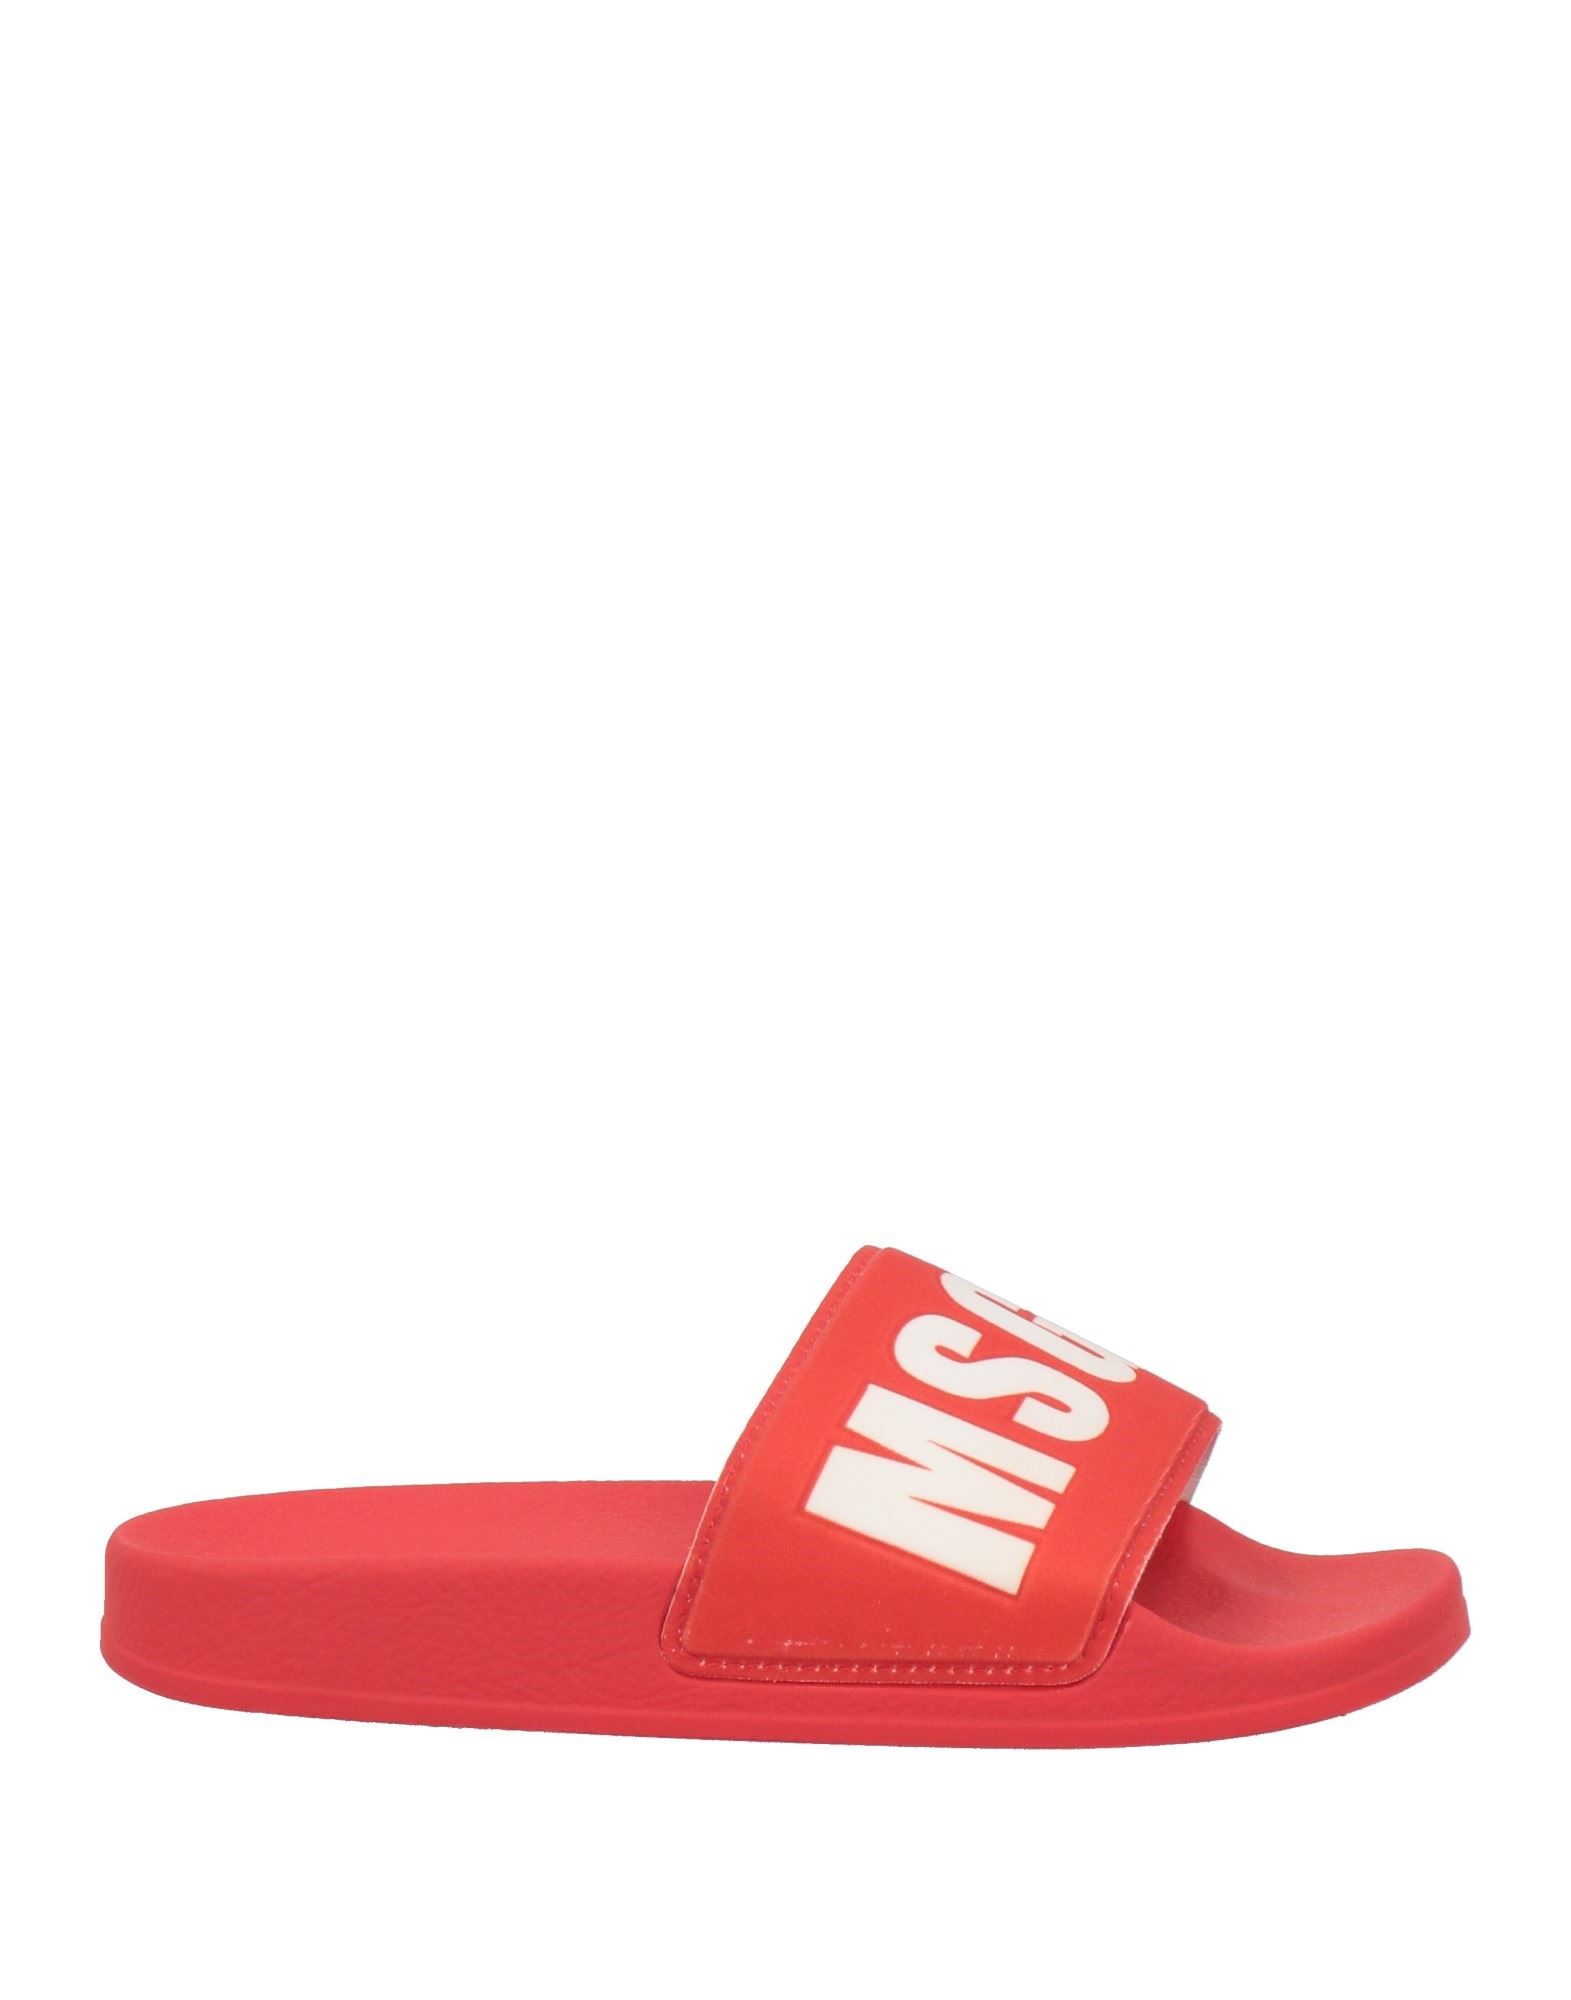 Msgm Sandals In Tomato Red